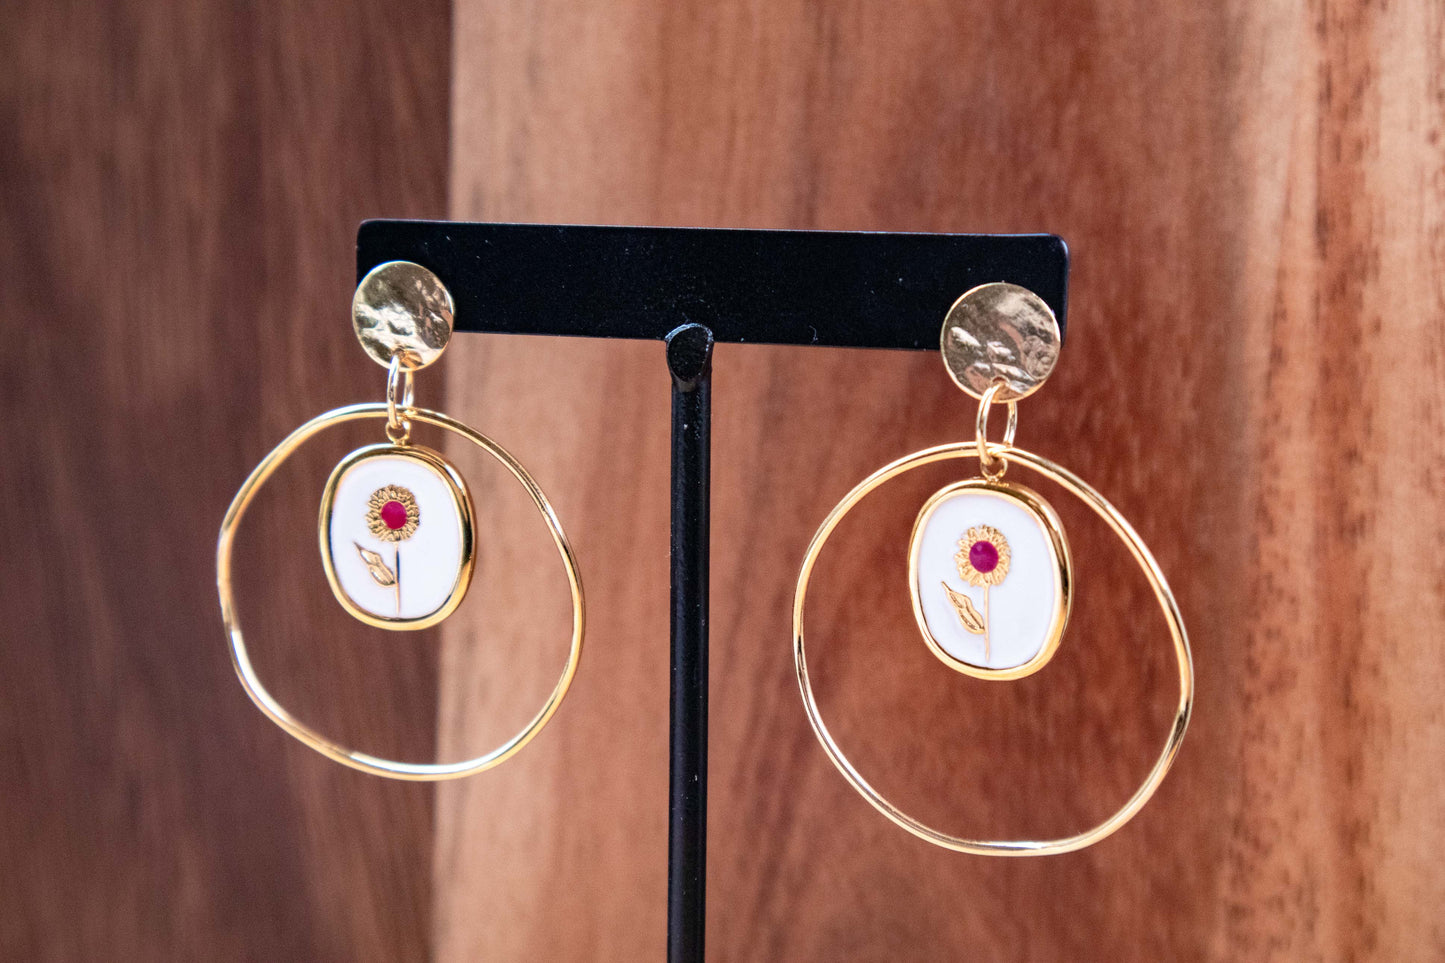 Earrings by FeSendra | Acetate | Fine Gold - 24 Carat Gold - PENDENTE OVAL ACIER INOX 316L DORÉ - Or 18 Carats